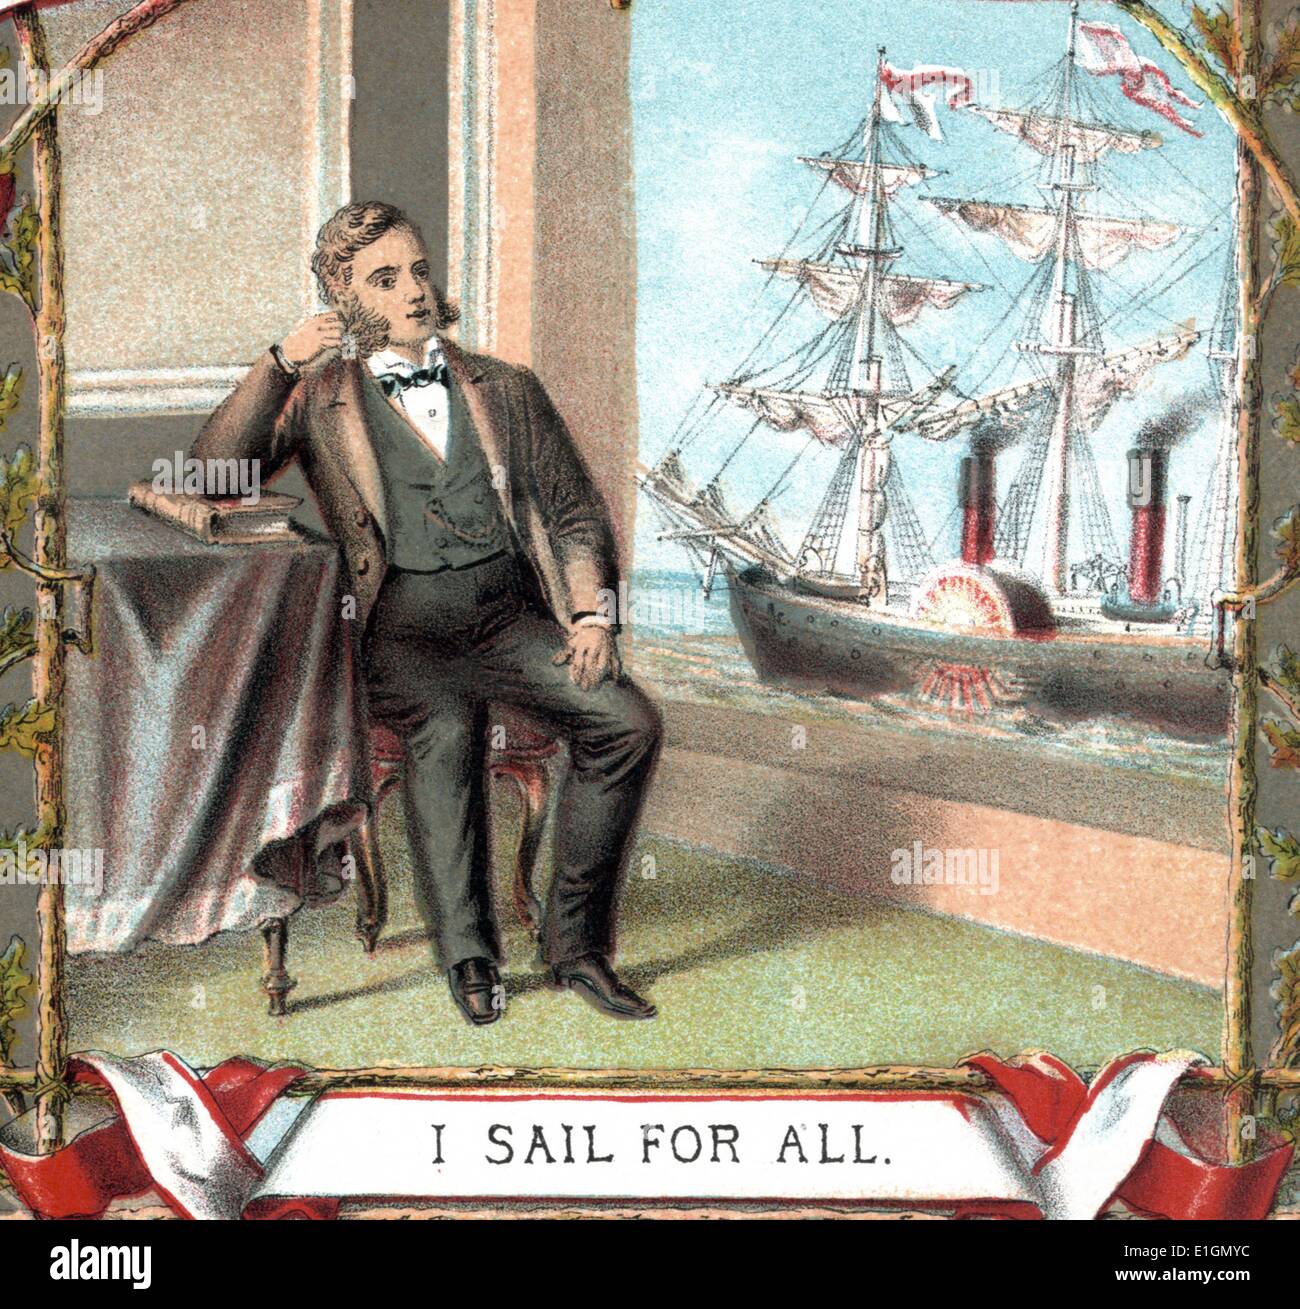 Vignette inspired by the Granger movement, depicts a ship owner watching his vessel through a window, asserting the importance of the farmer in American society. The title is a variation on the movement's motto, 'I Pay for All.' The Grange was an organization composed mostly of Midwestern farmers, who united to combat the monopolistic practices of the railroads and grain elevators.  Dated 1875 Stock Photo